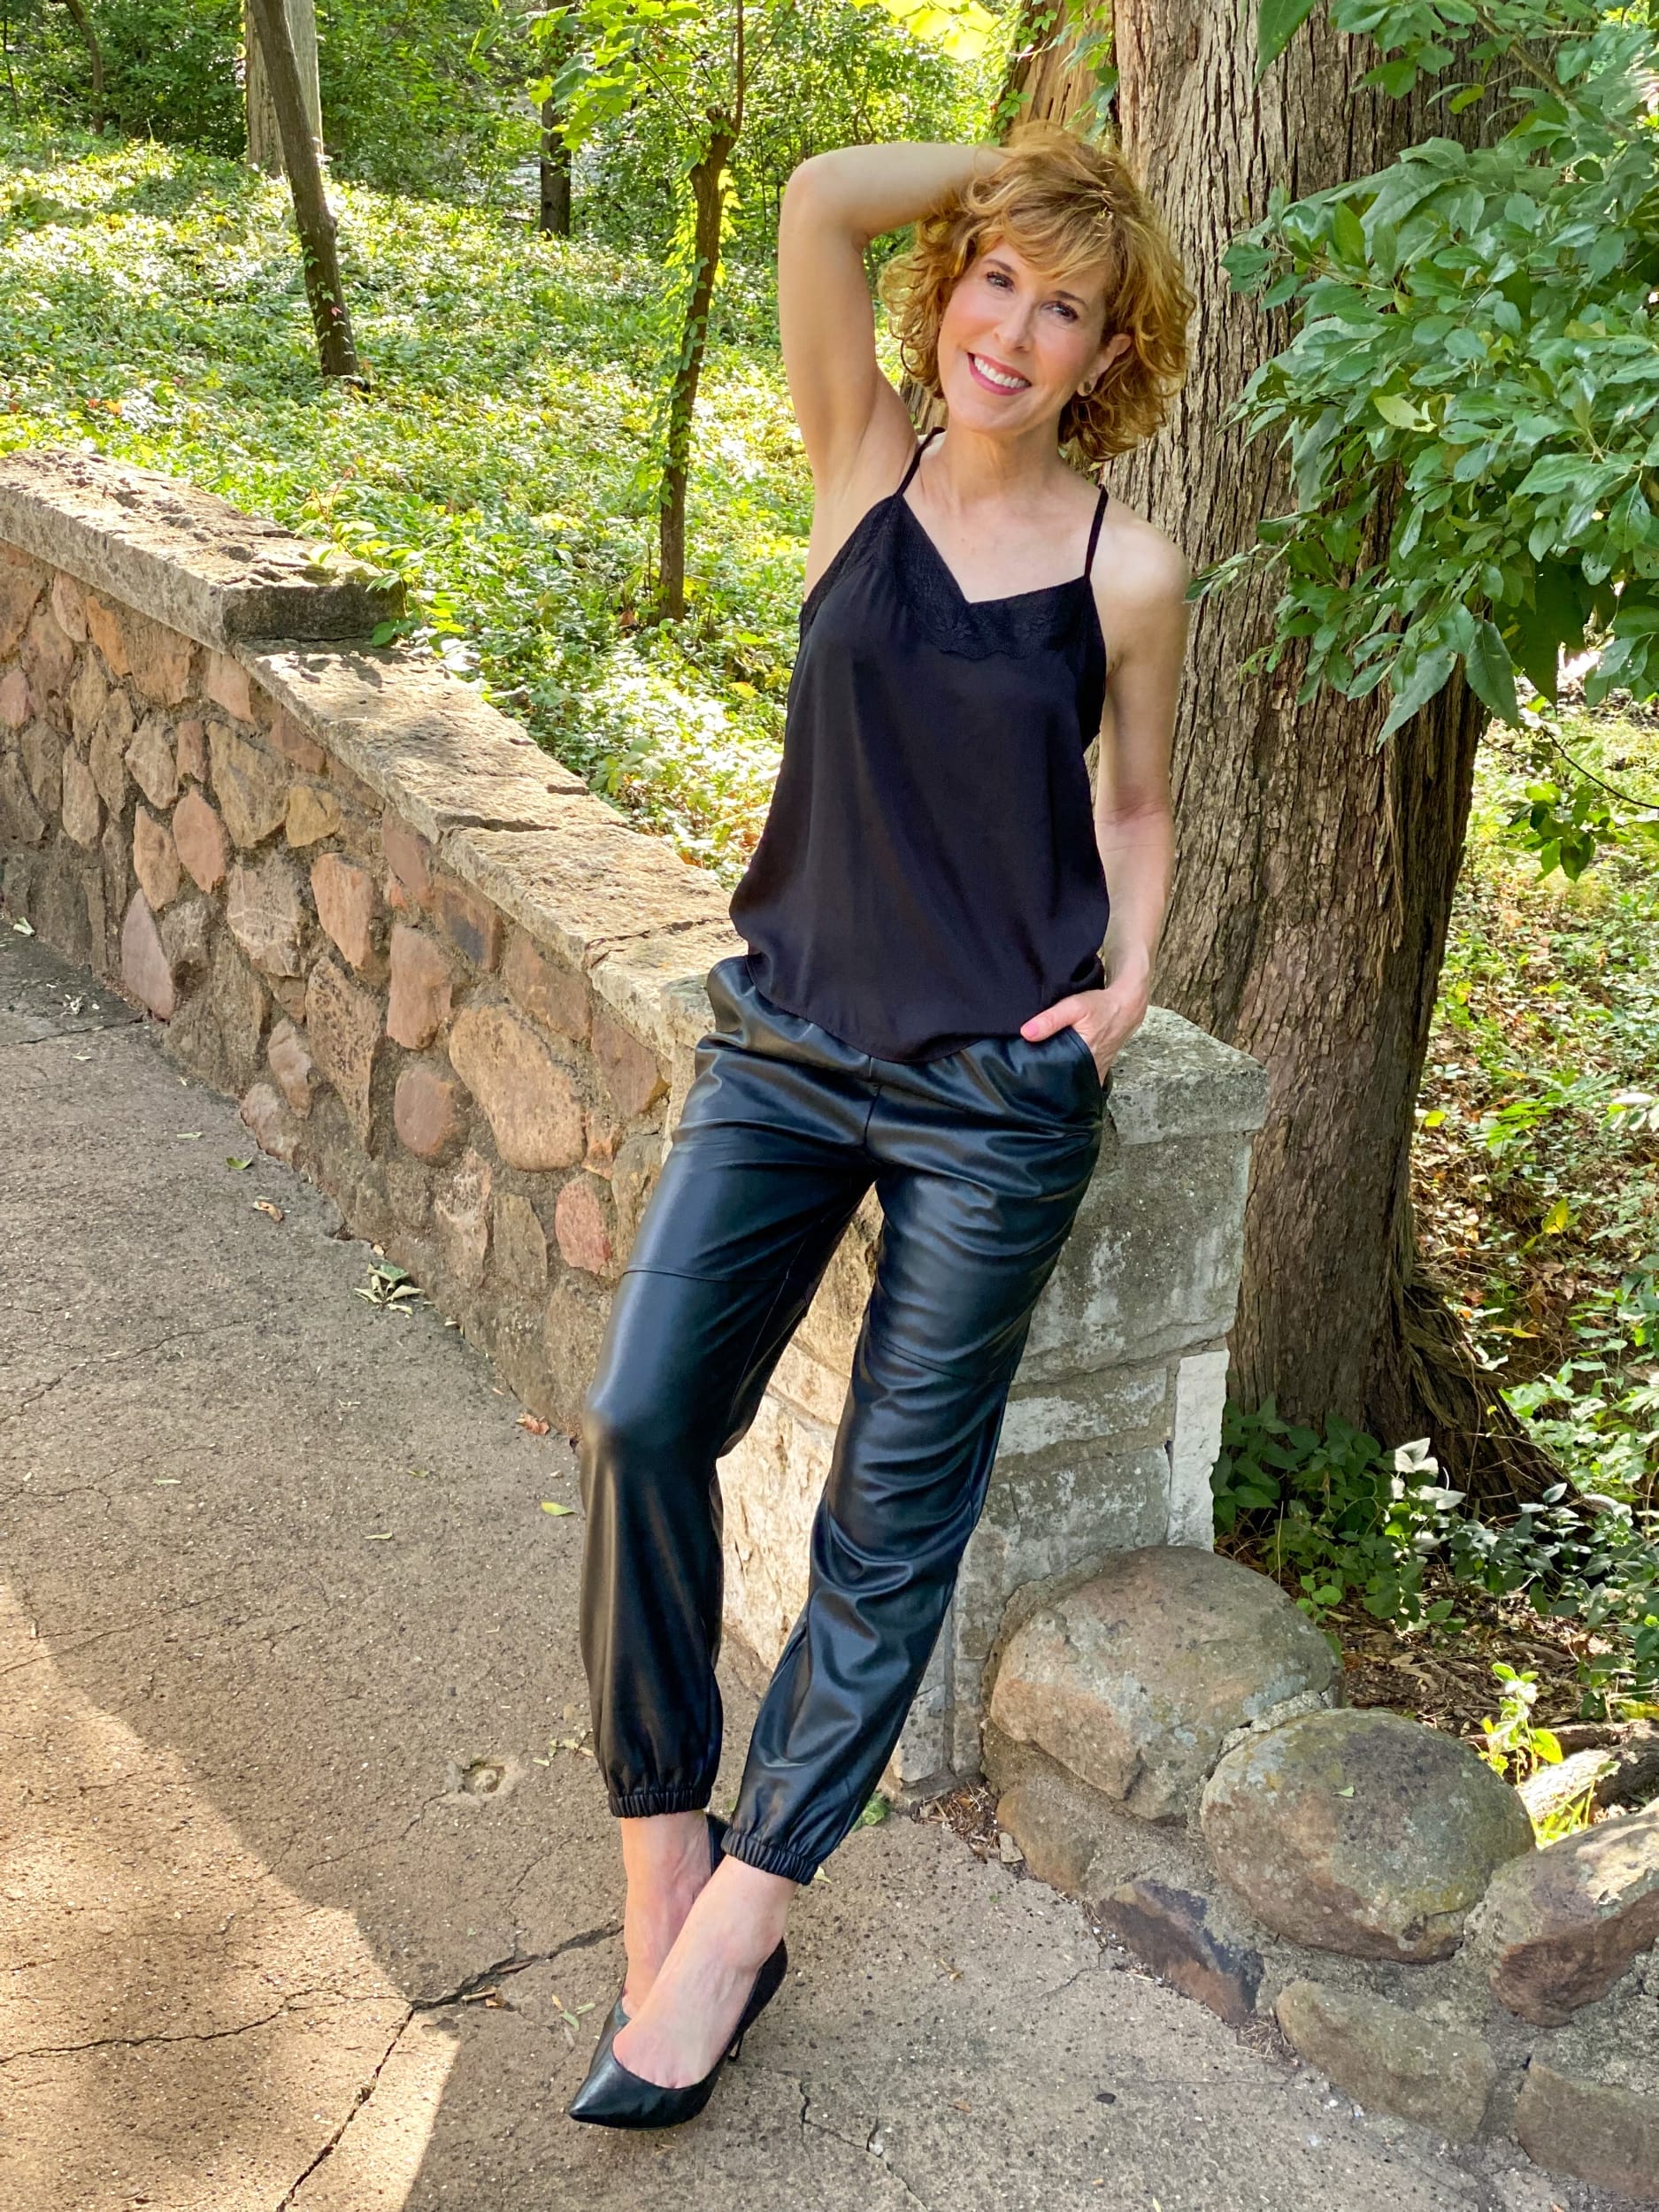 woman over 50 posing outside by a tree wearing nordstrom made brands spring top styles like this Eyelash Lace Trim Satin Crop Camisole and black pleather joggers